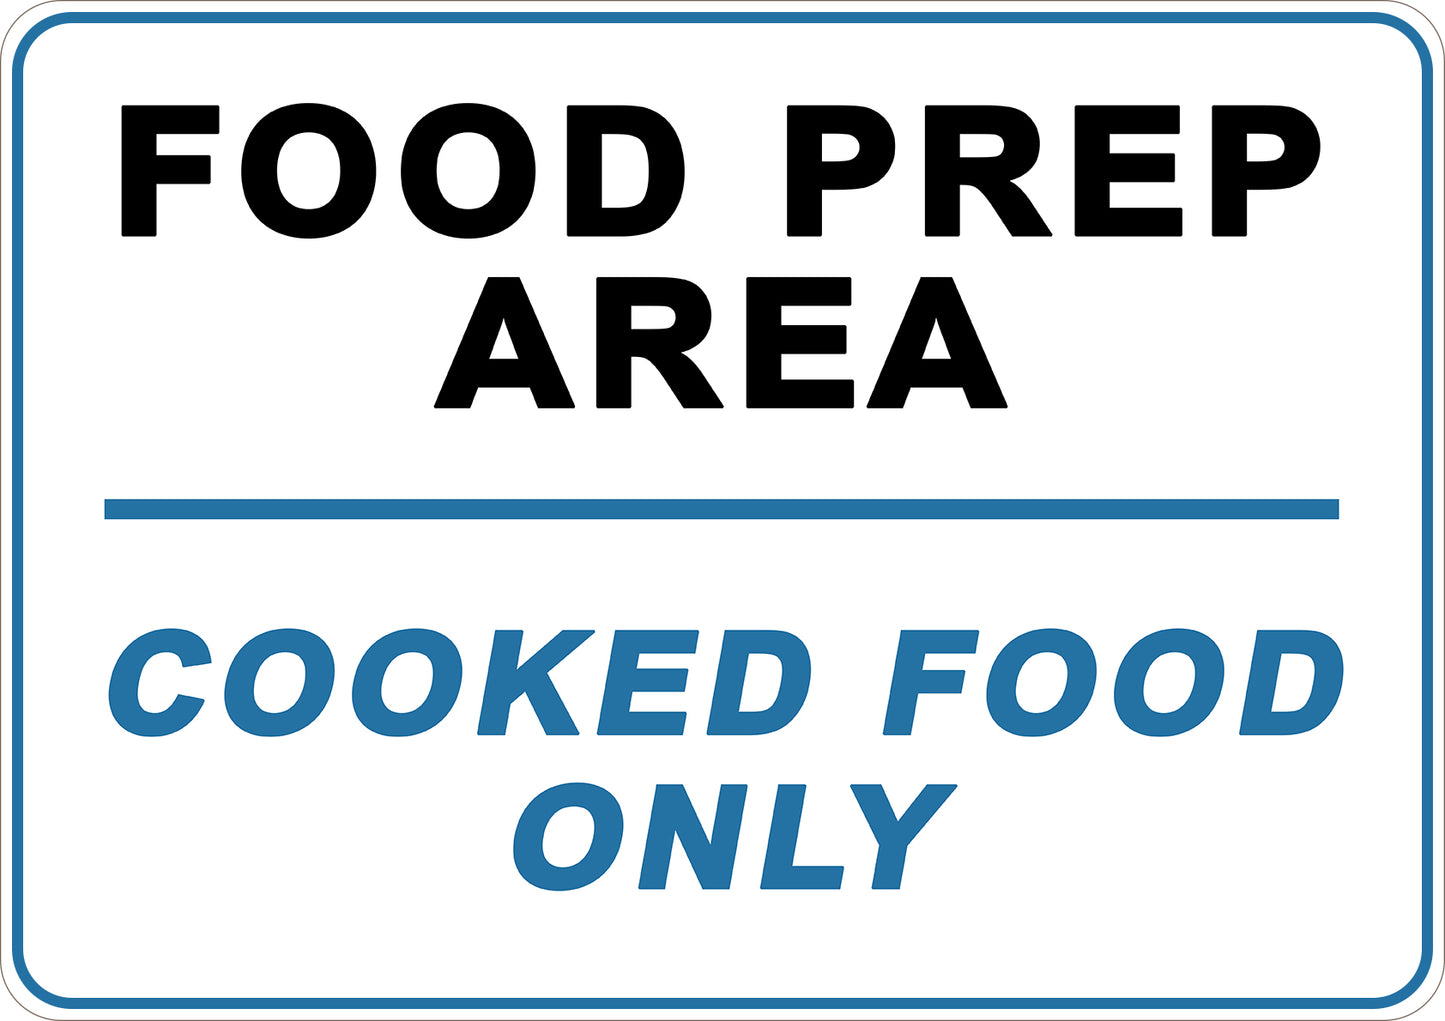 Cooked Food Only Printed Sign